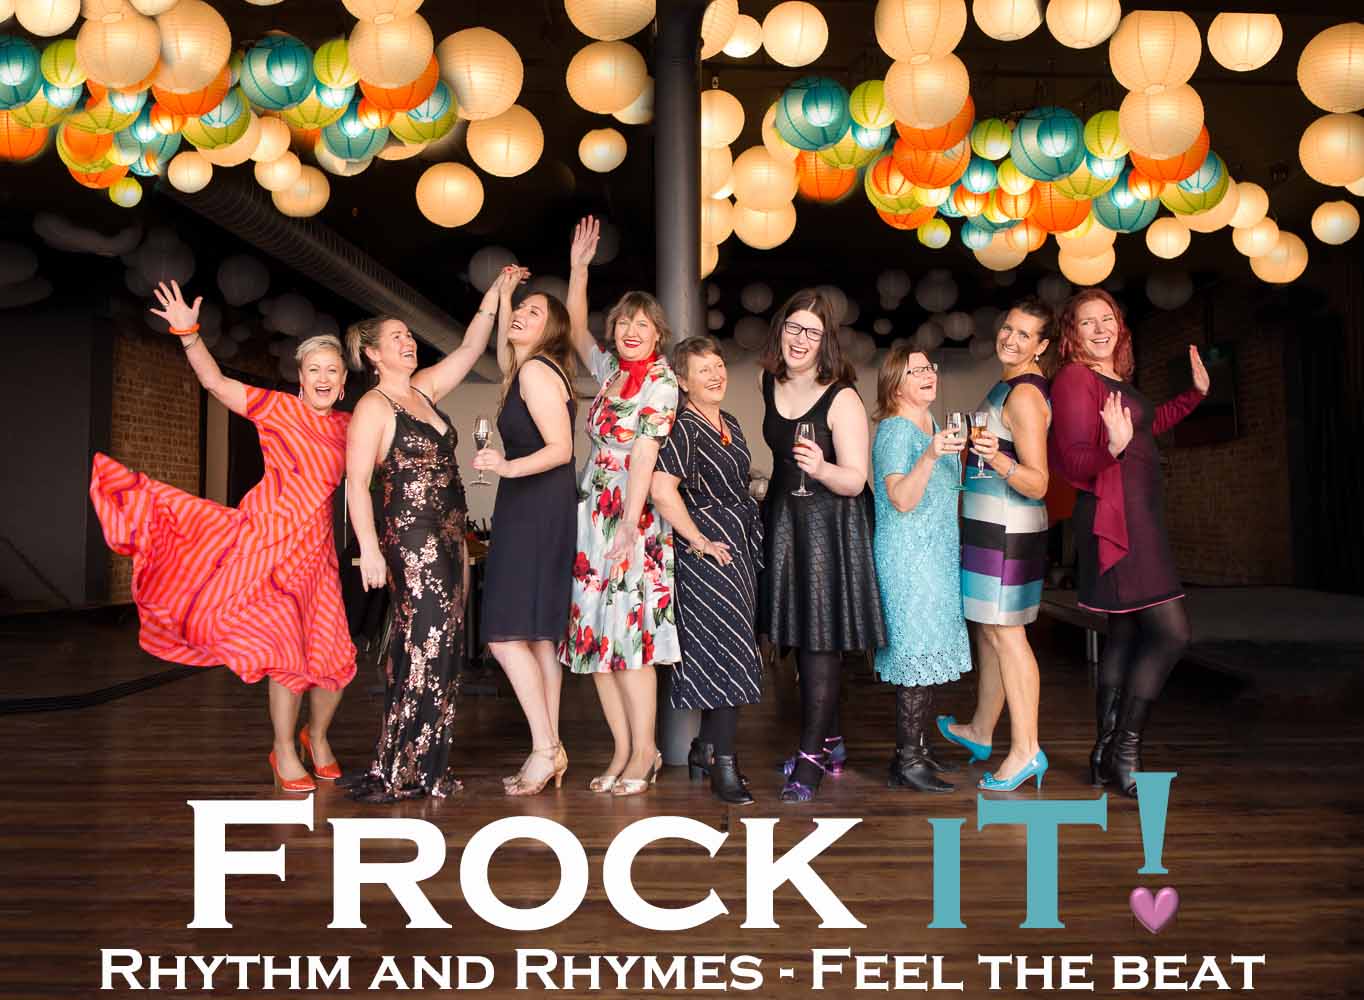 Frock IT! Rhythm and Rhymes - feel the beat. Women in dresses laughing, dancing and holding glasses of champagne